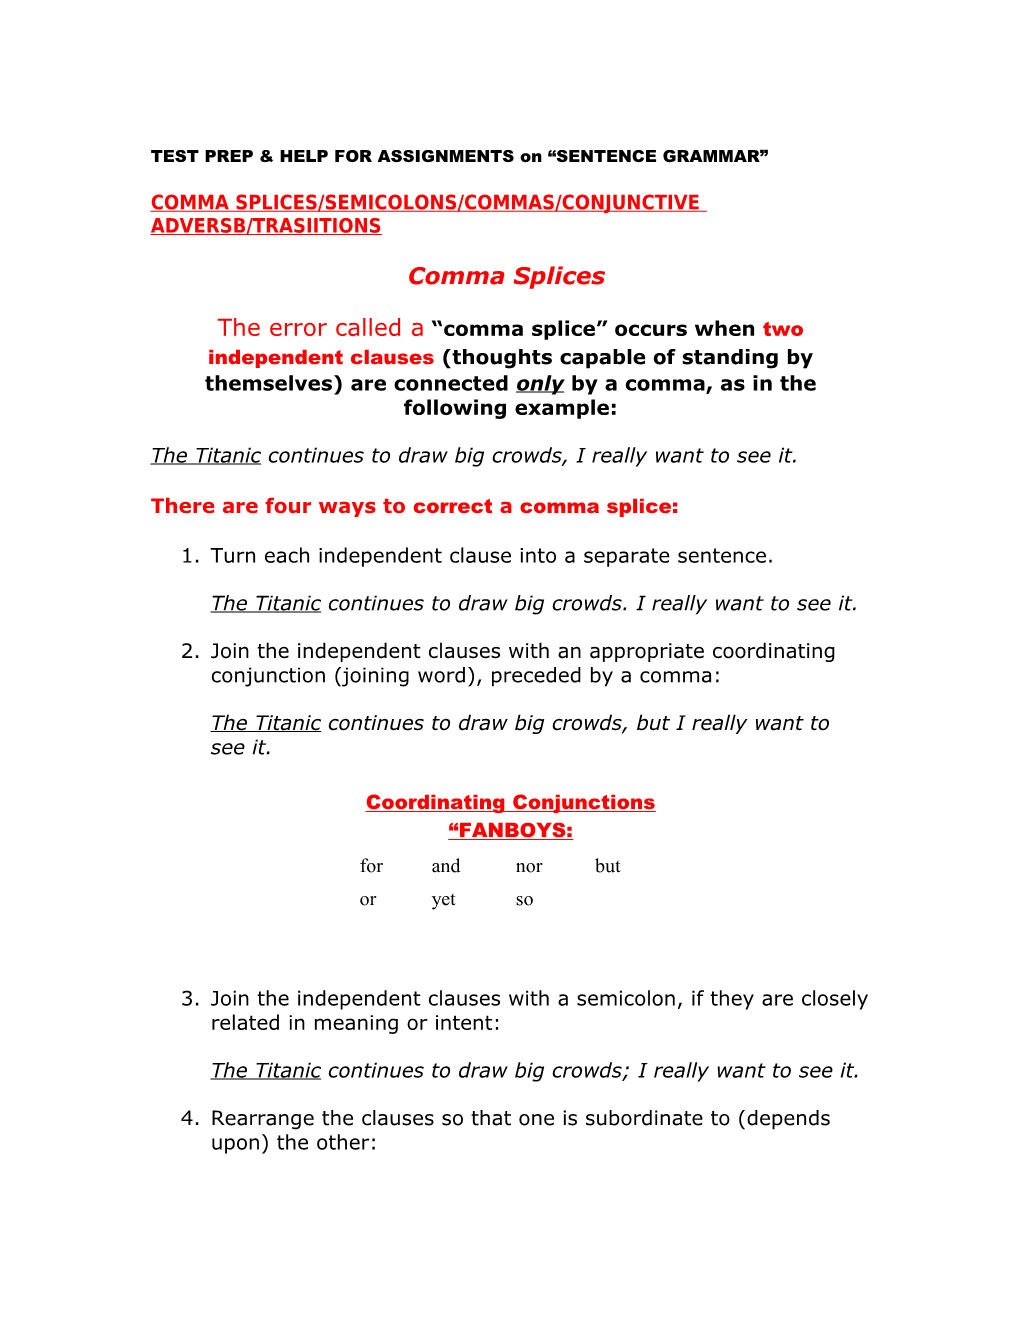 TEST PREP & HELP for ASSIGNMENTS on SENTENCE GREAMMAR